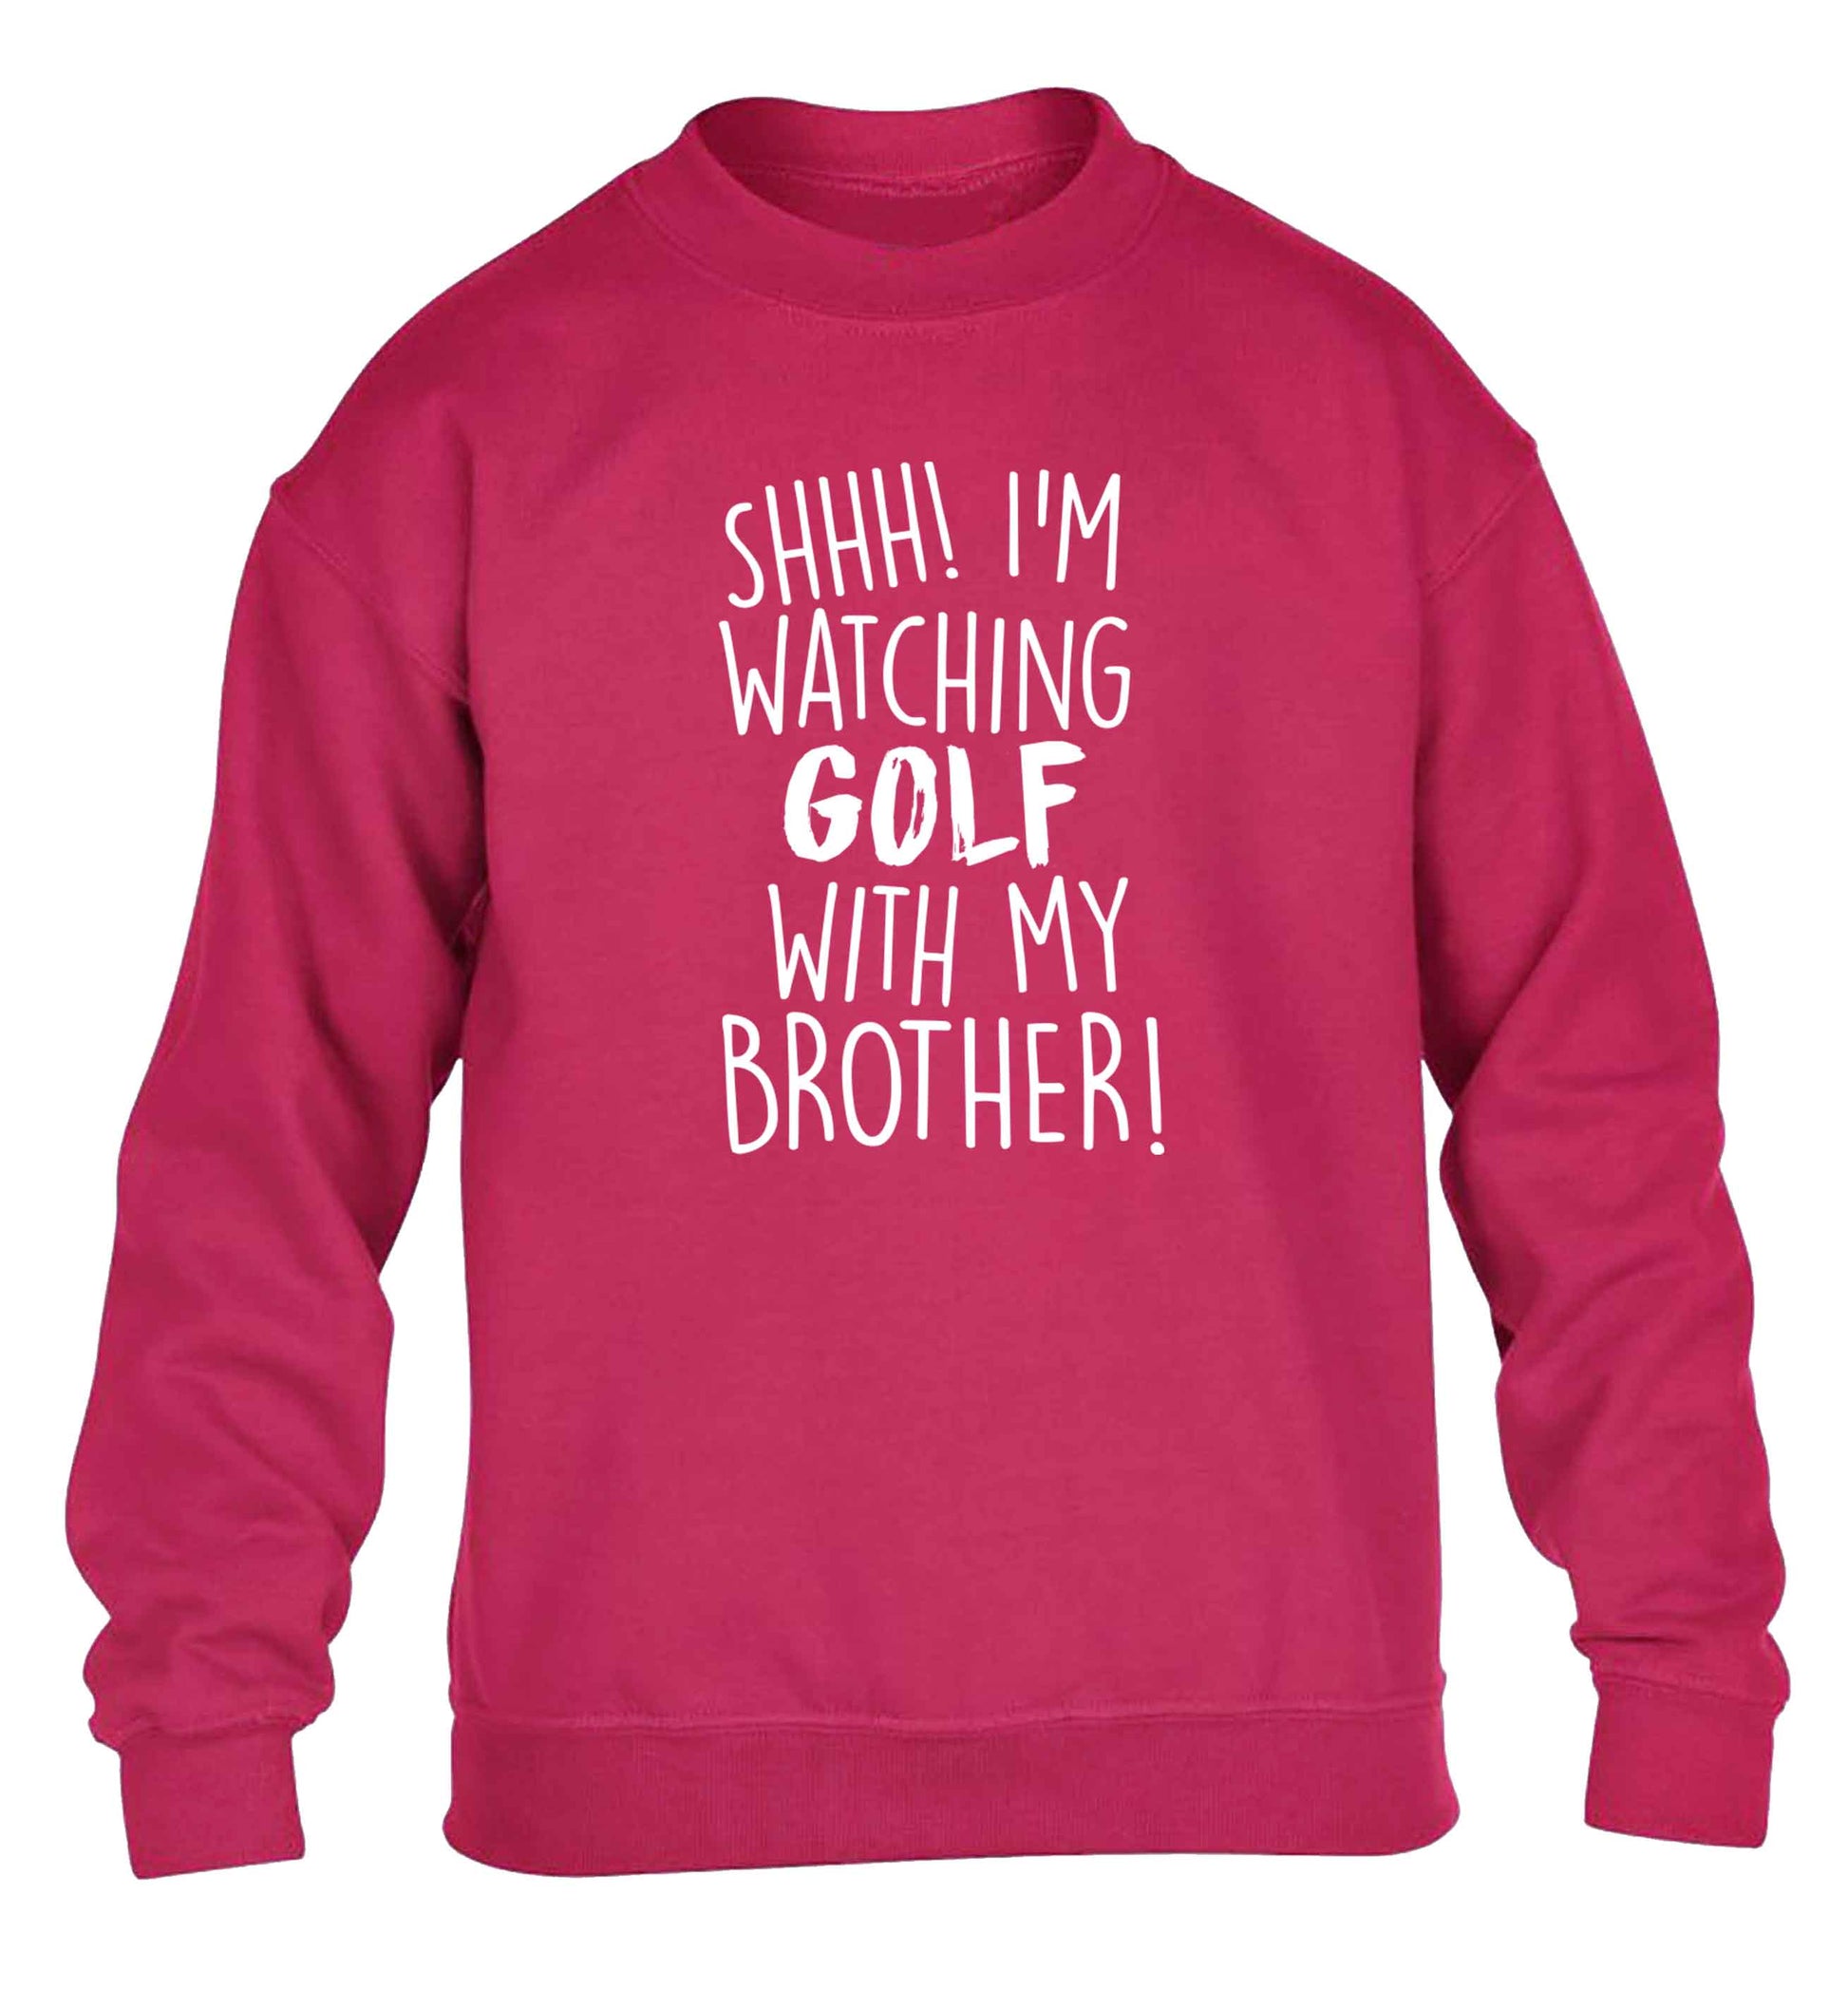 Shh I'm watching golf with my brother children's pink sweater 12-13 Years